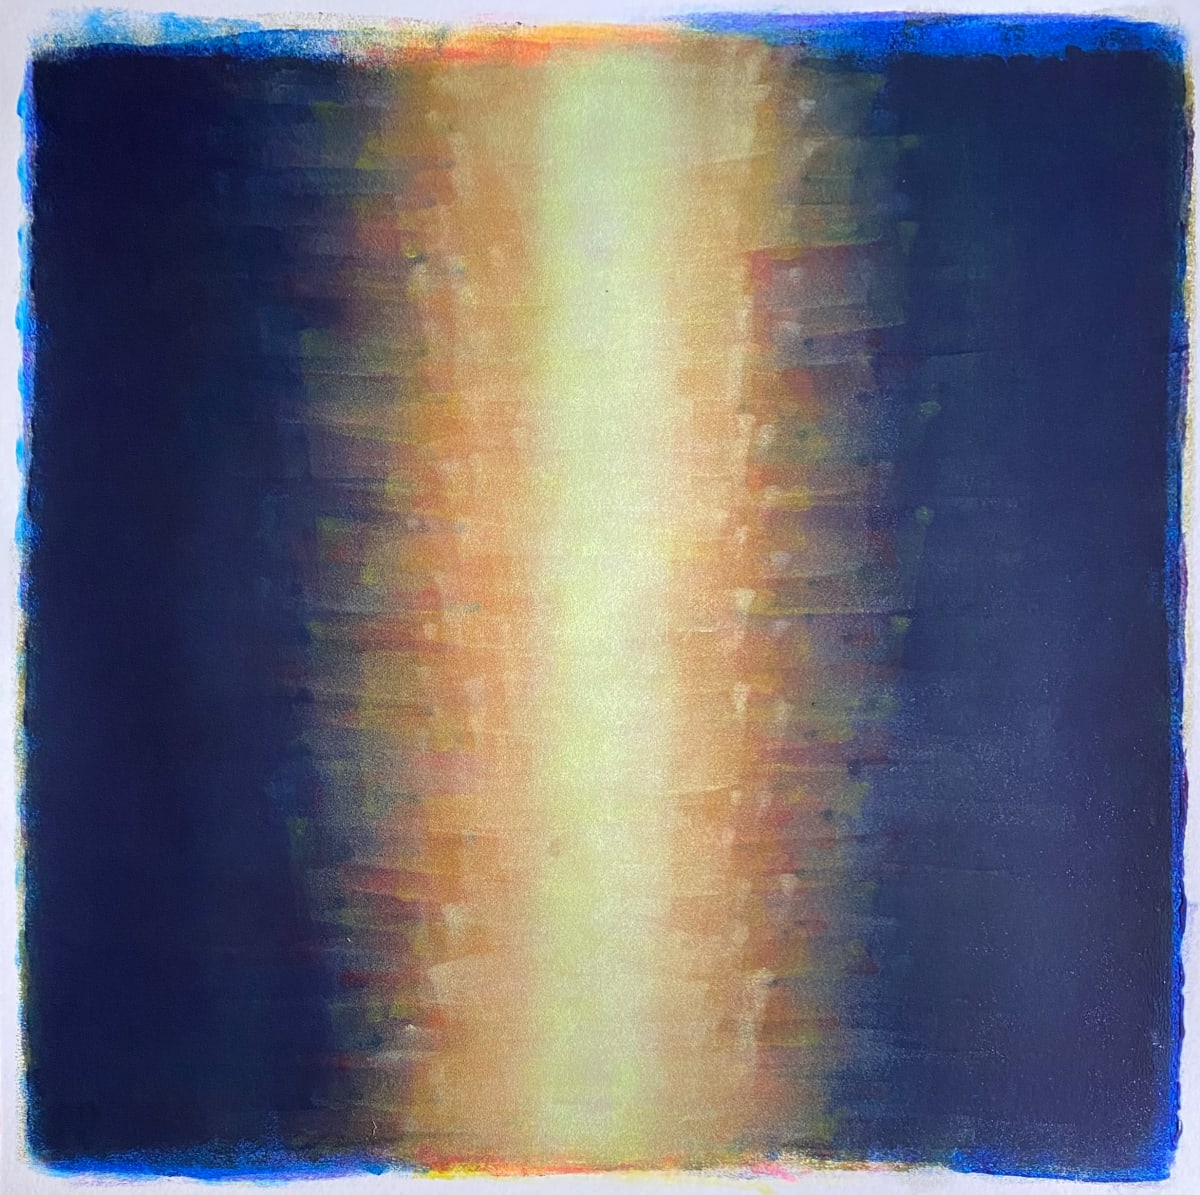 Nocturne 5 by Dean Brown  Image: 2024
Acrylic on paper 
24x24